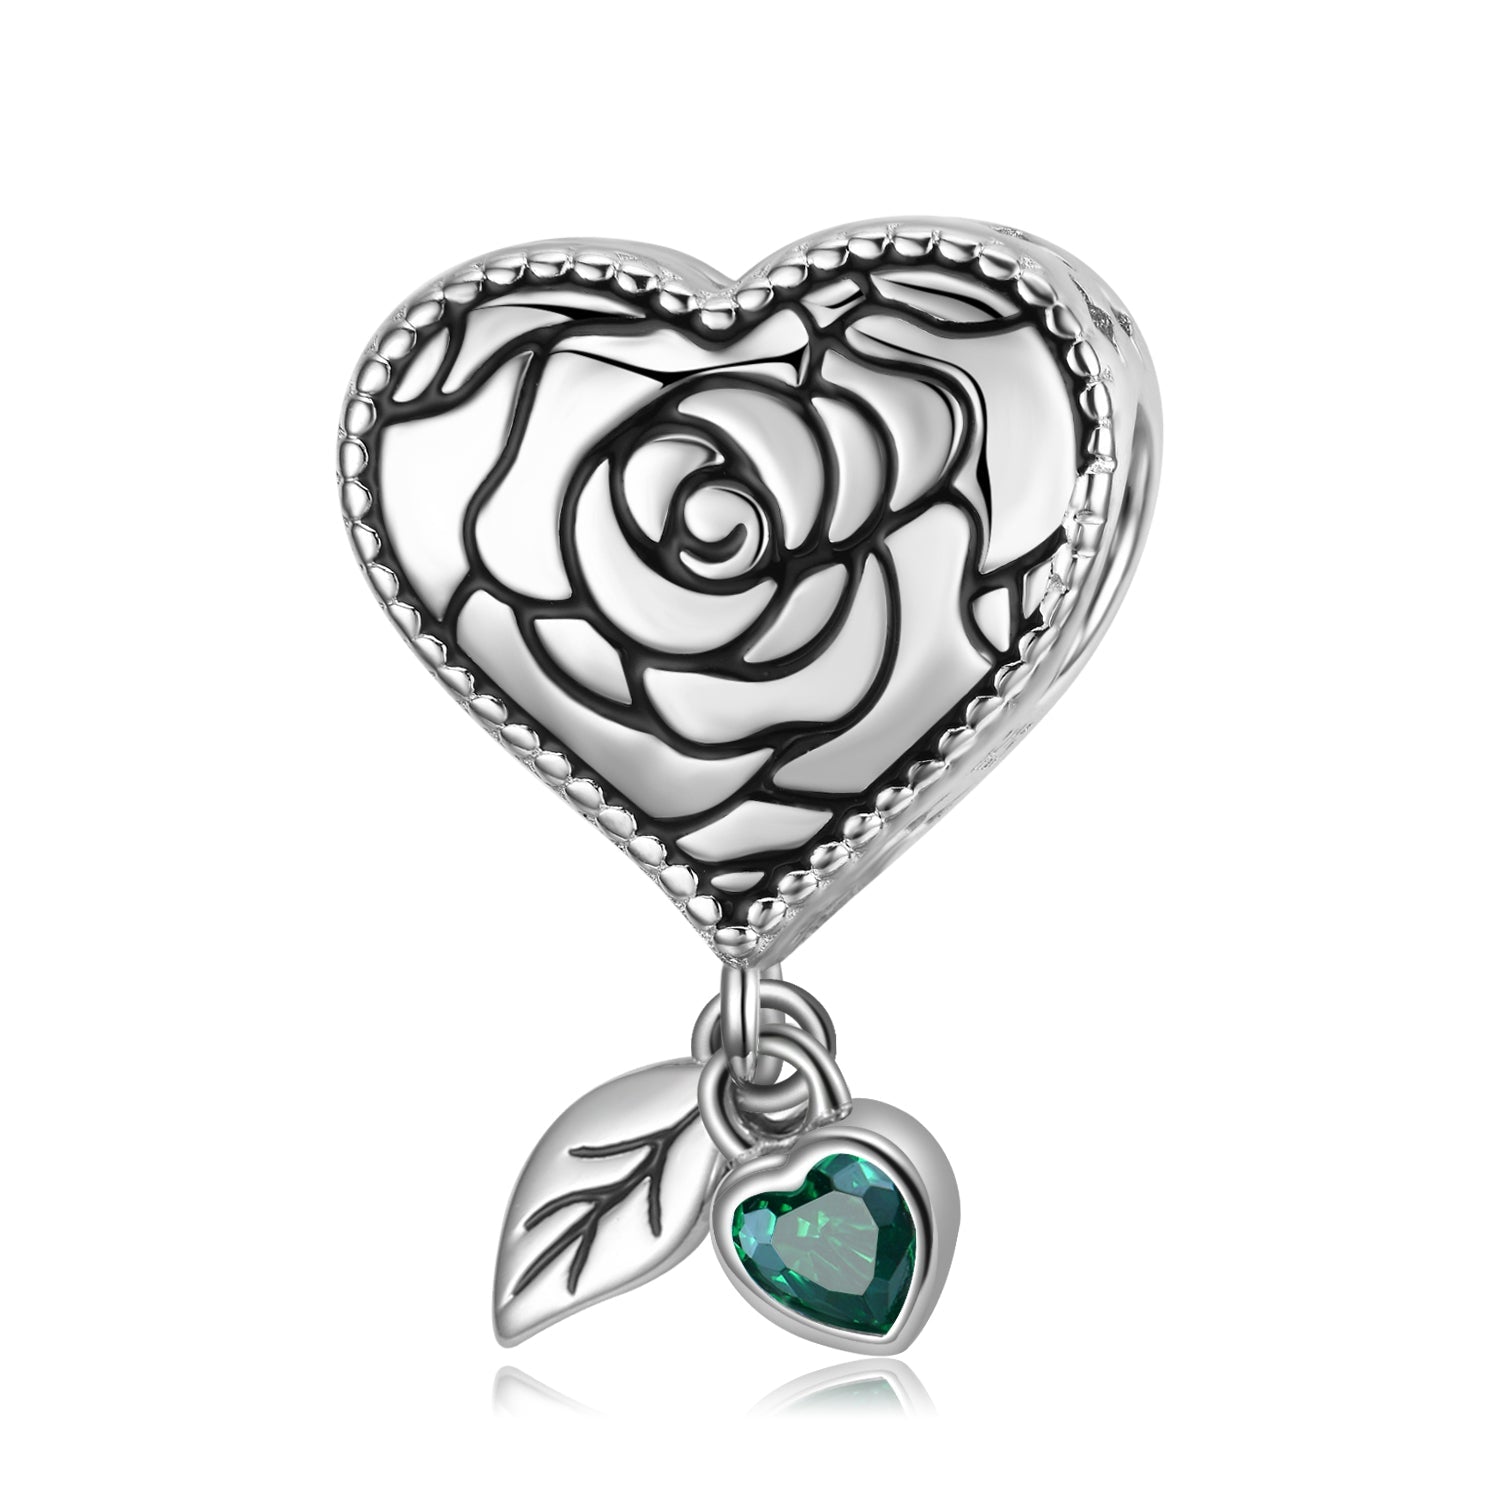 Rose heart with green gemstone